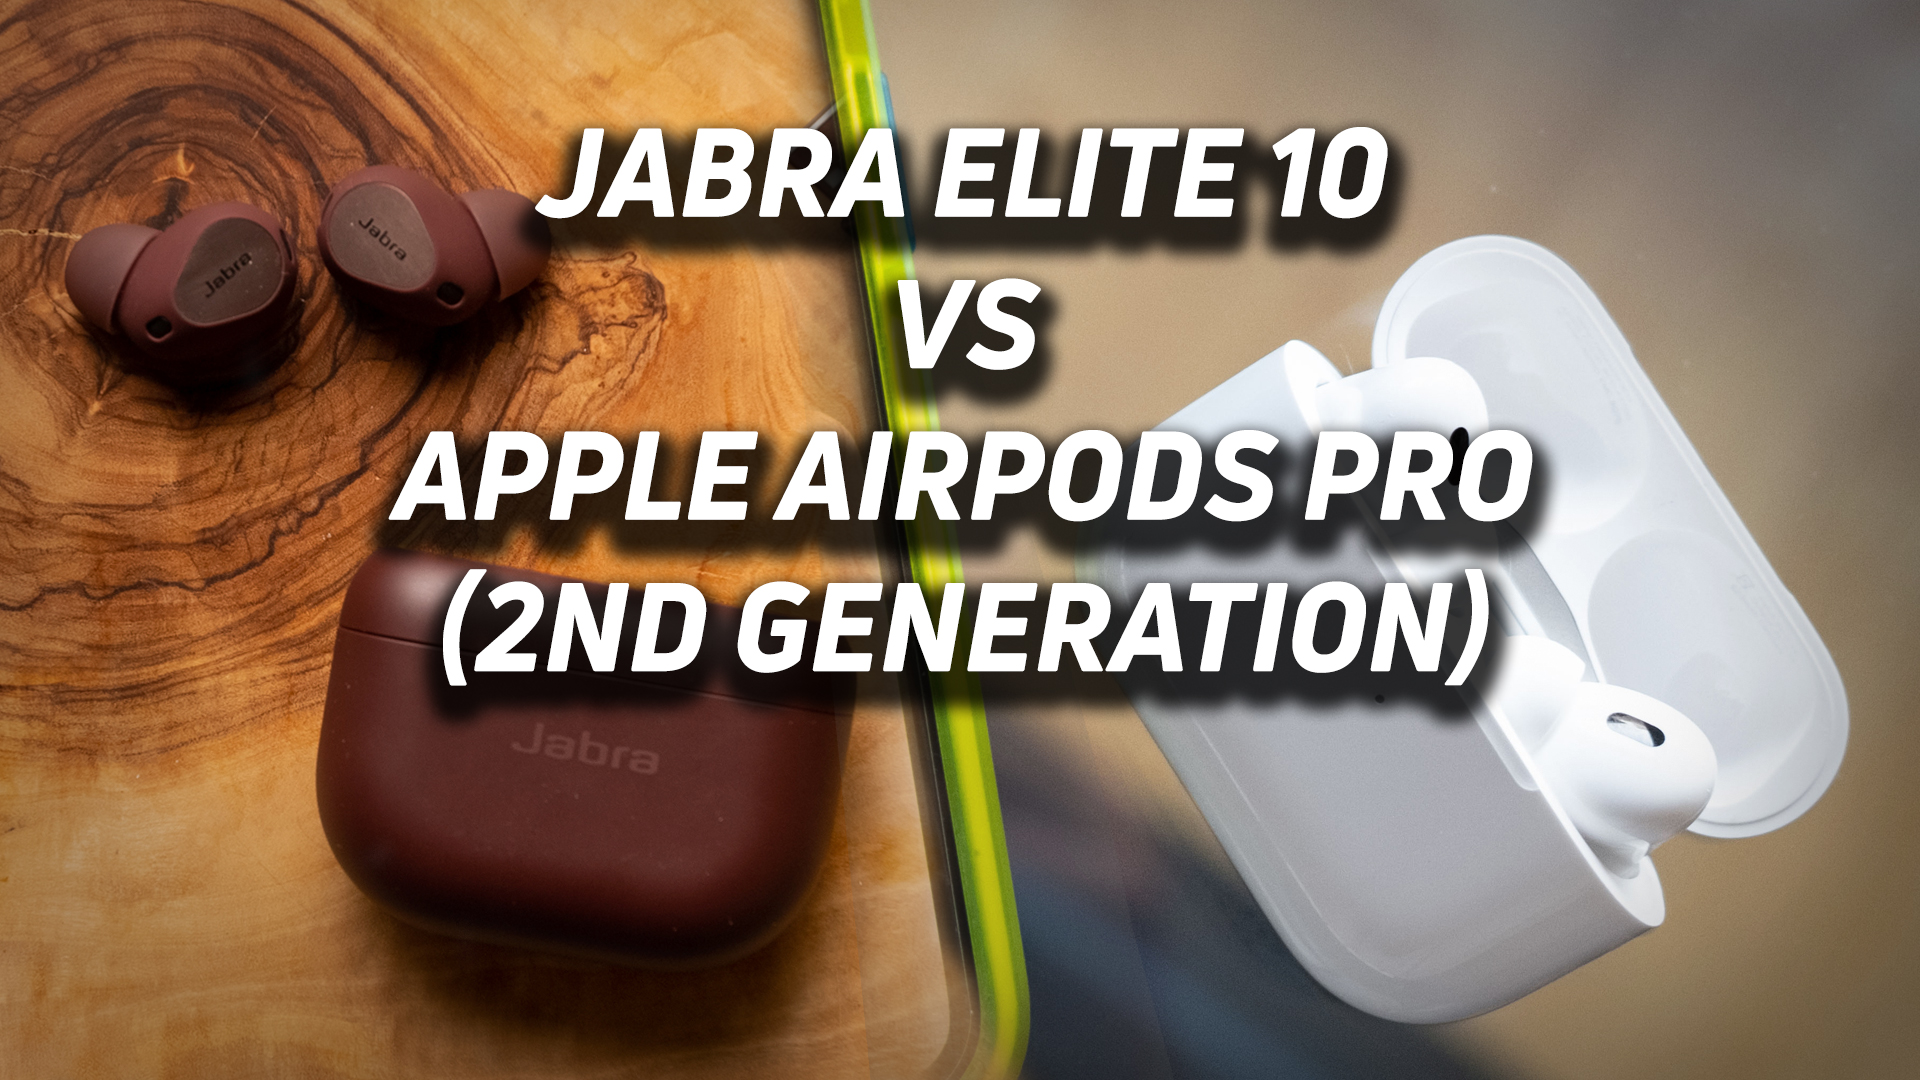 Two image overlaid show the Jabra Elite 10 and the Apple AirPods Pro (2nd generation) with text.